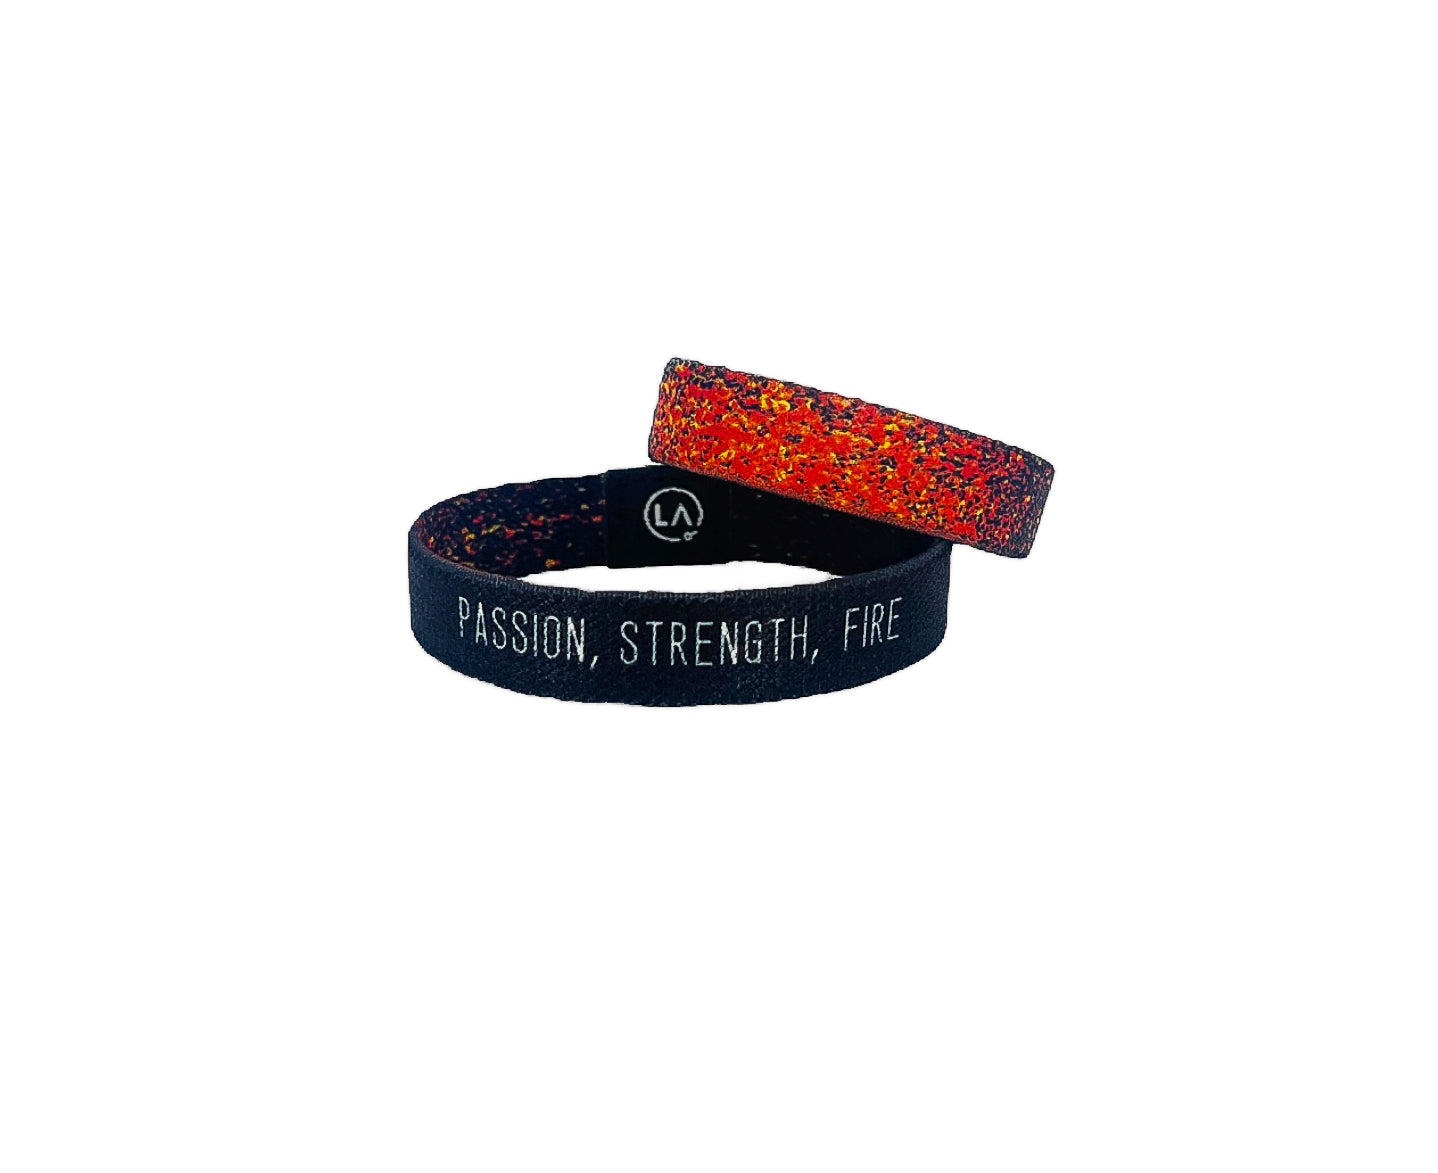 Passion, Strength, Fire Refocus Band